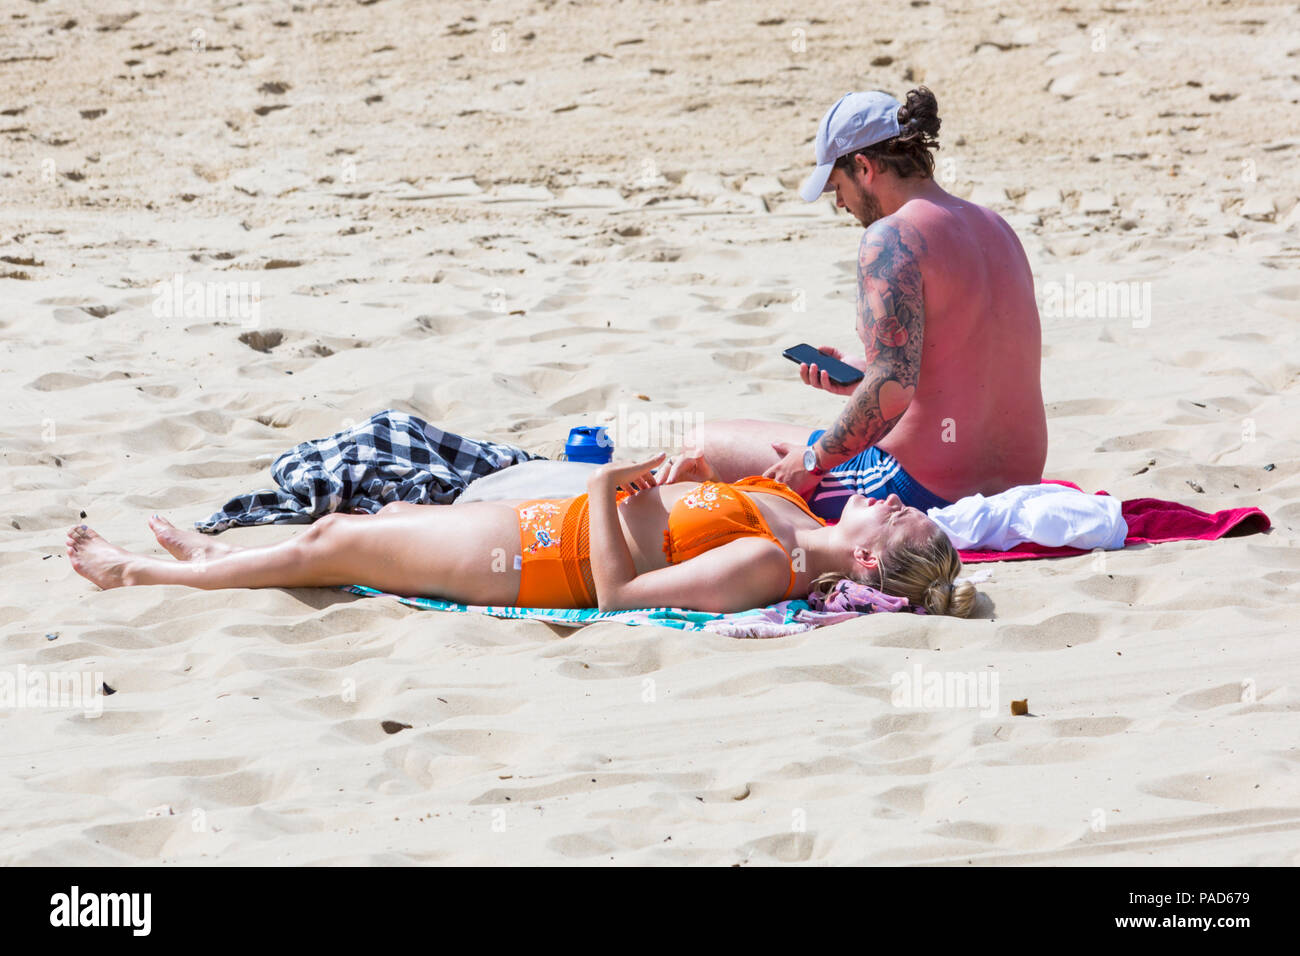 Bournemouth, Dorset, UK. 22nd July 2018. UK weather: hot and sunny at Bournemouth beaches, as sunseekers head to the seaside to soak up the sun. Couple sunbathing on the beach. Credit: Carolyn Jenkins/Alamy Live News Stock Photo